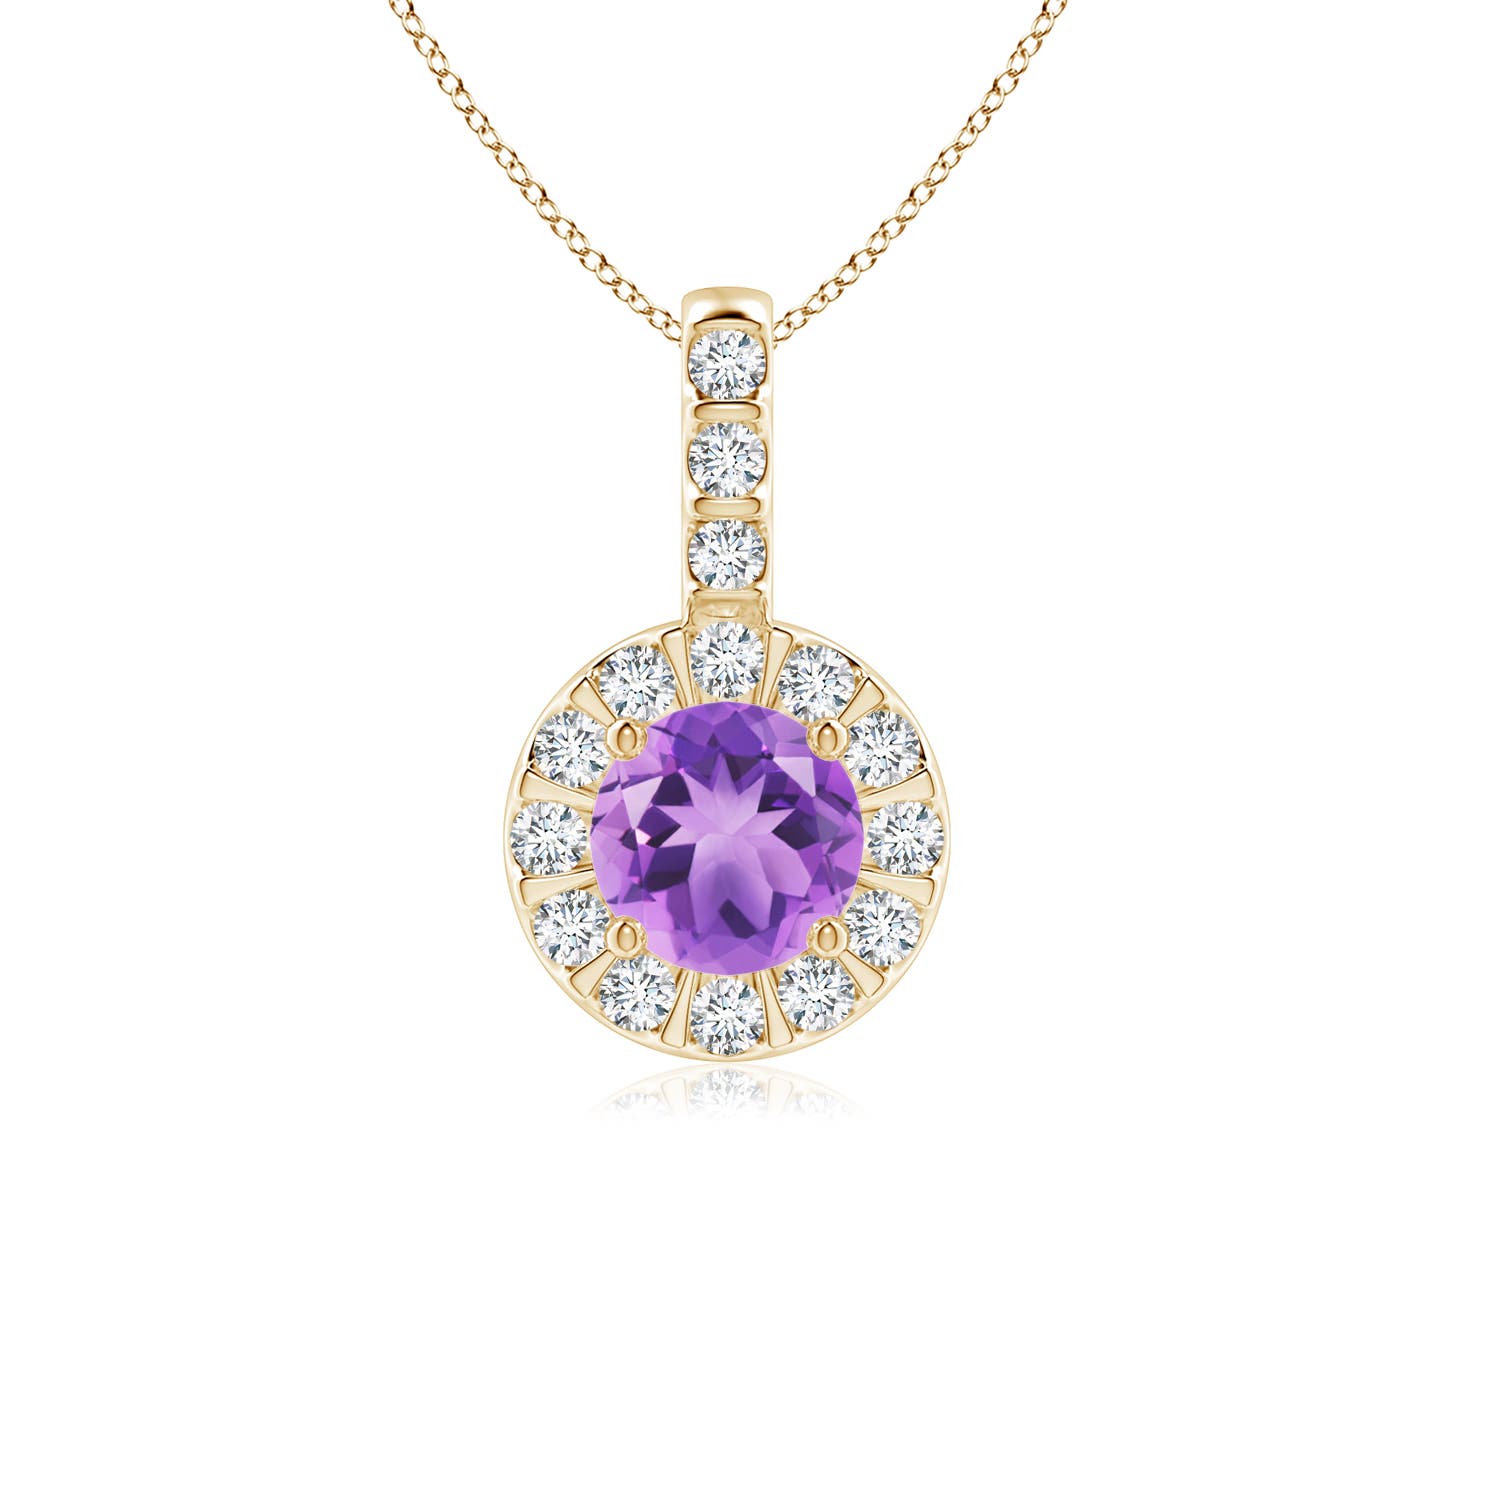 A - Amethyst / 0.63 CT / 14 KT Yellow Gold